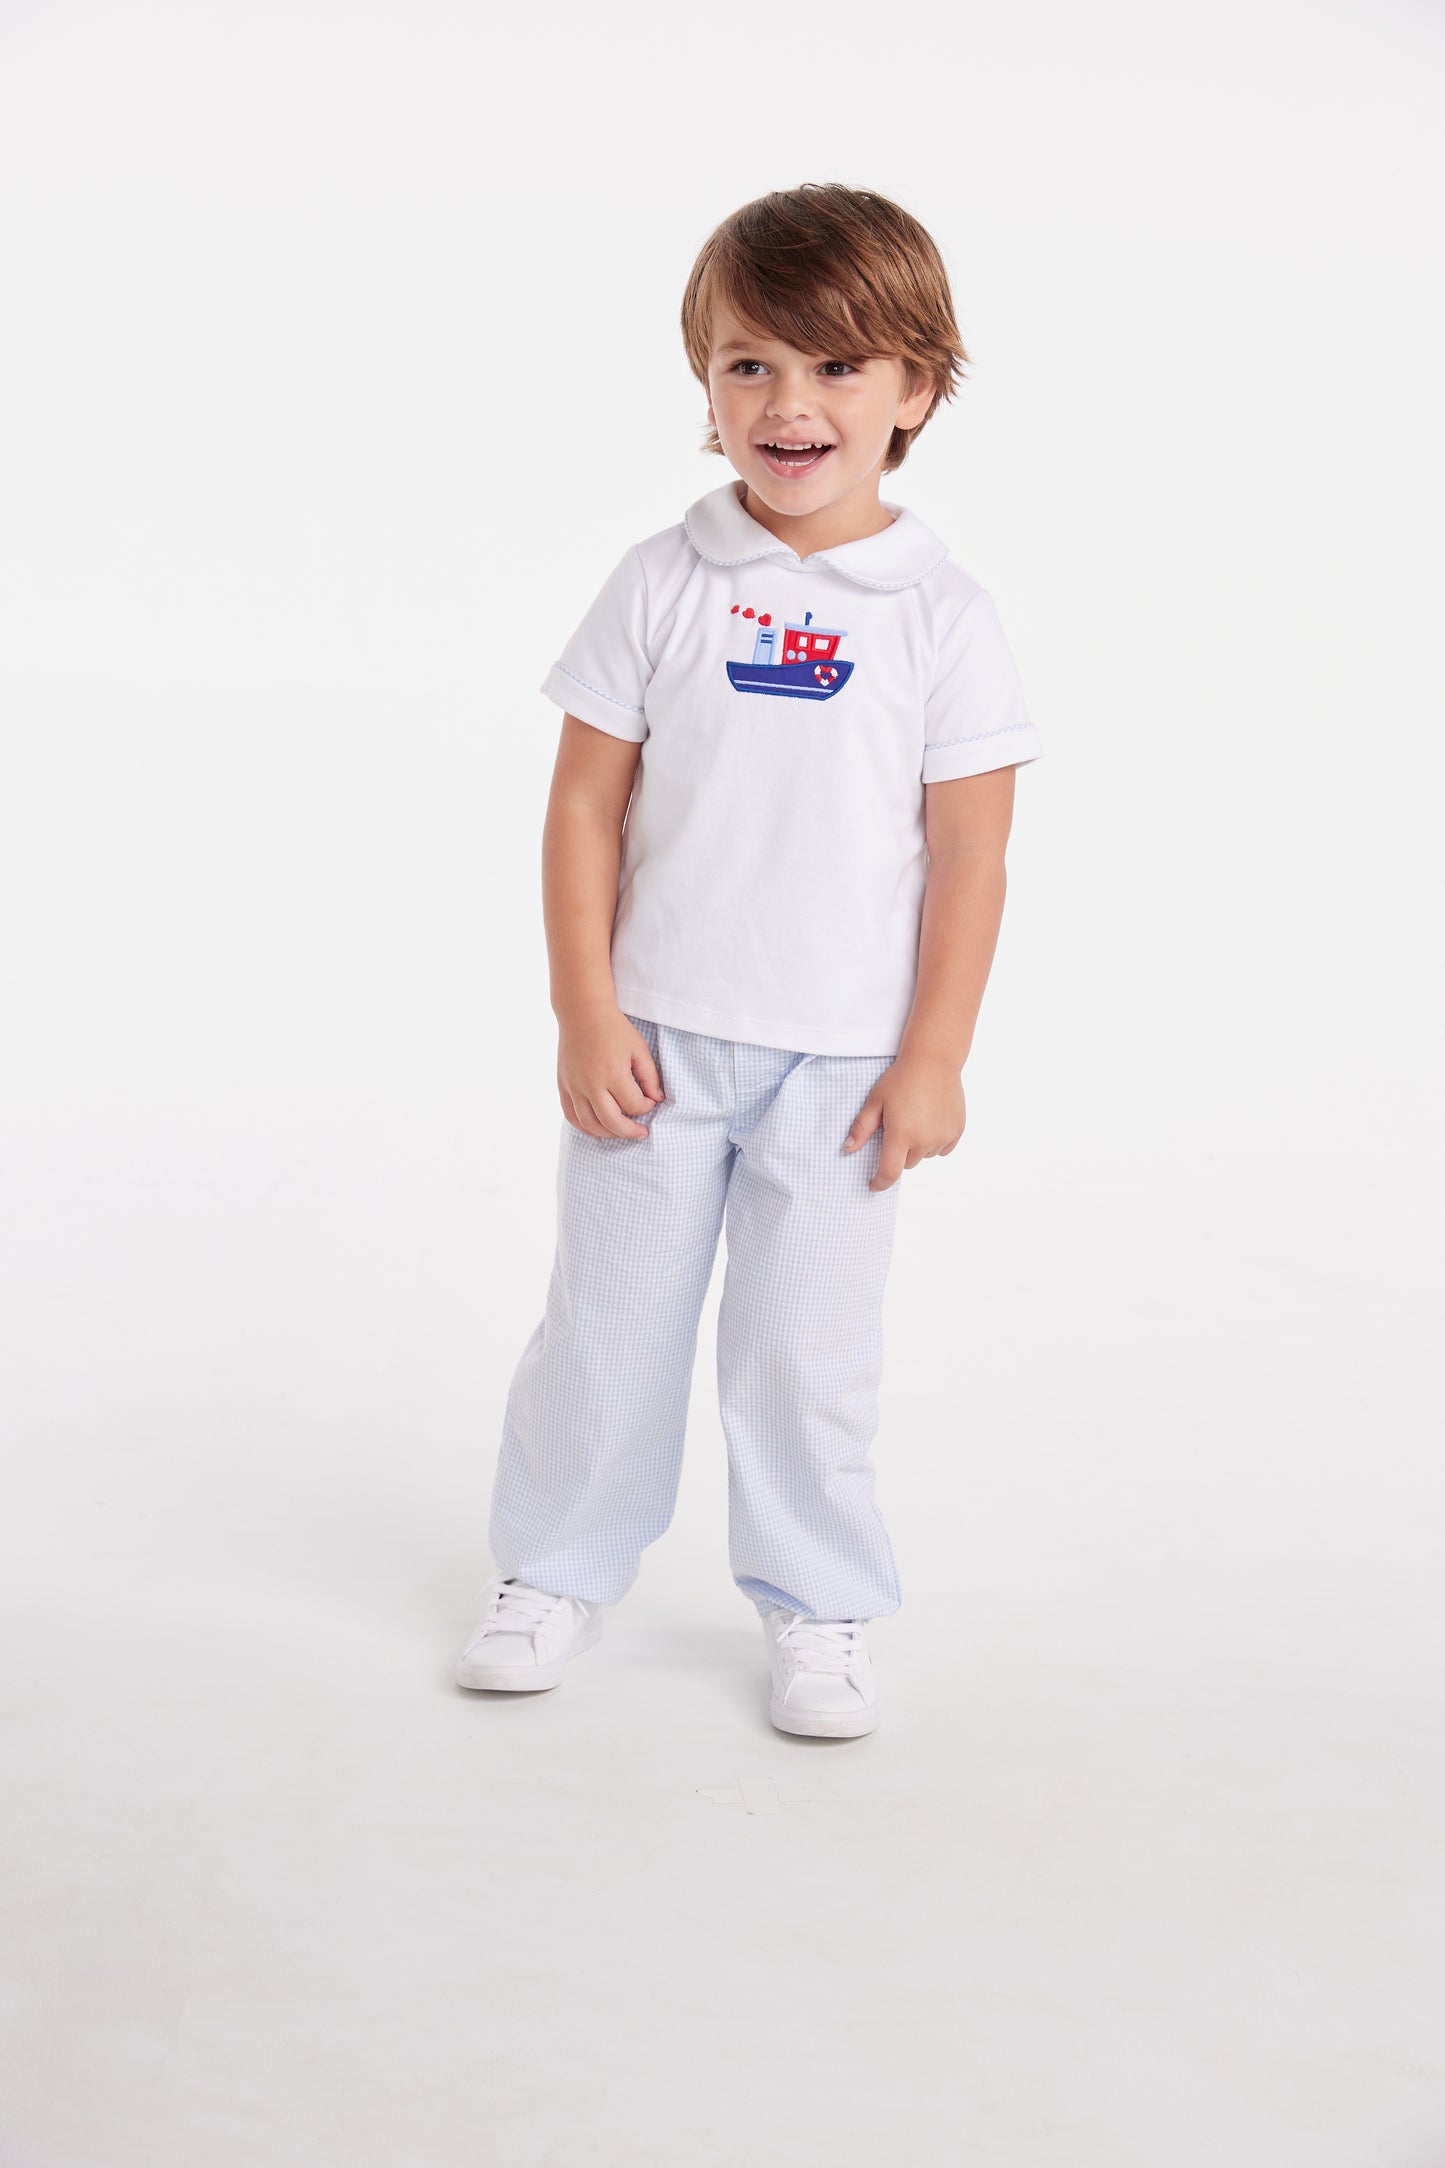 Tugboat Applique Peter Pan Pant Set by Little English.